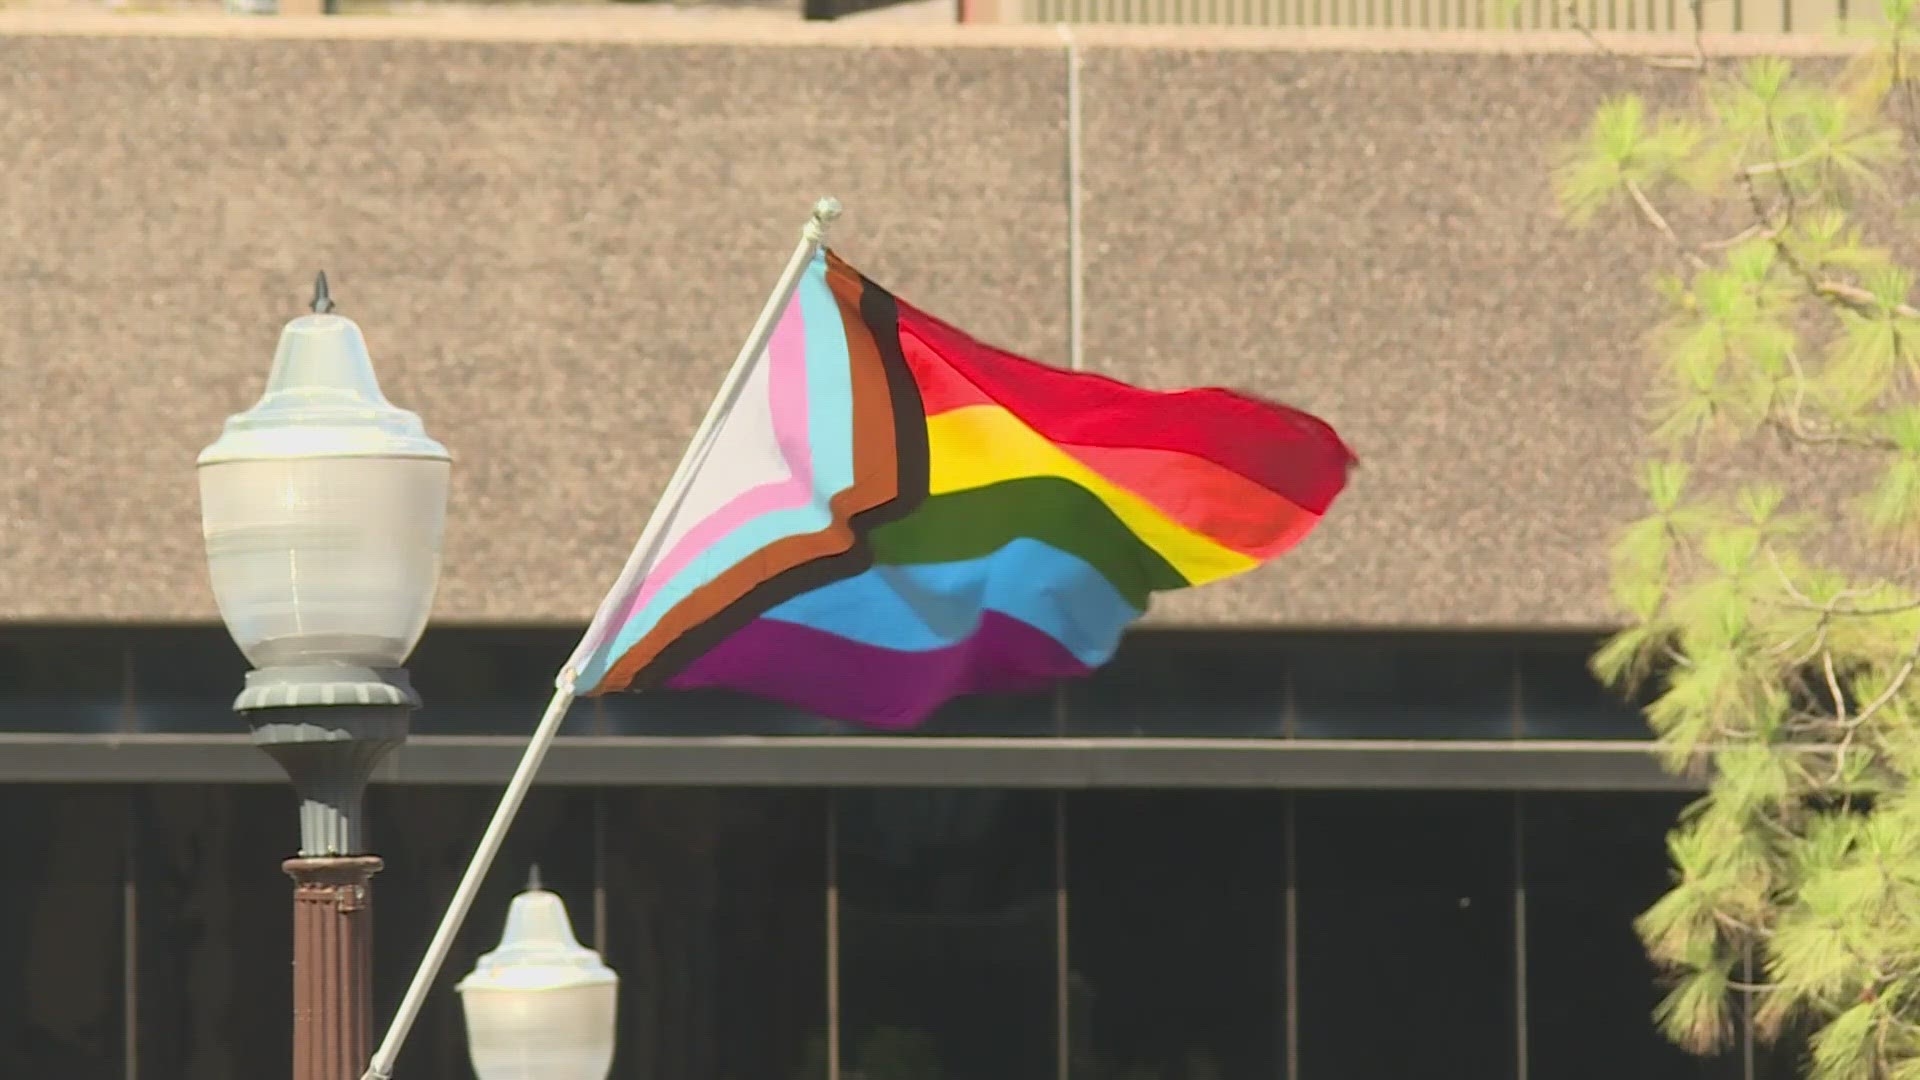 The city says the Pride flag has been replaced and the act of vandalism is under investigation.